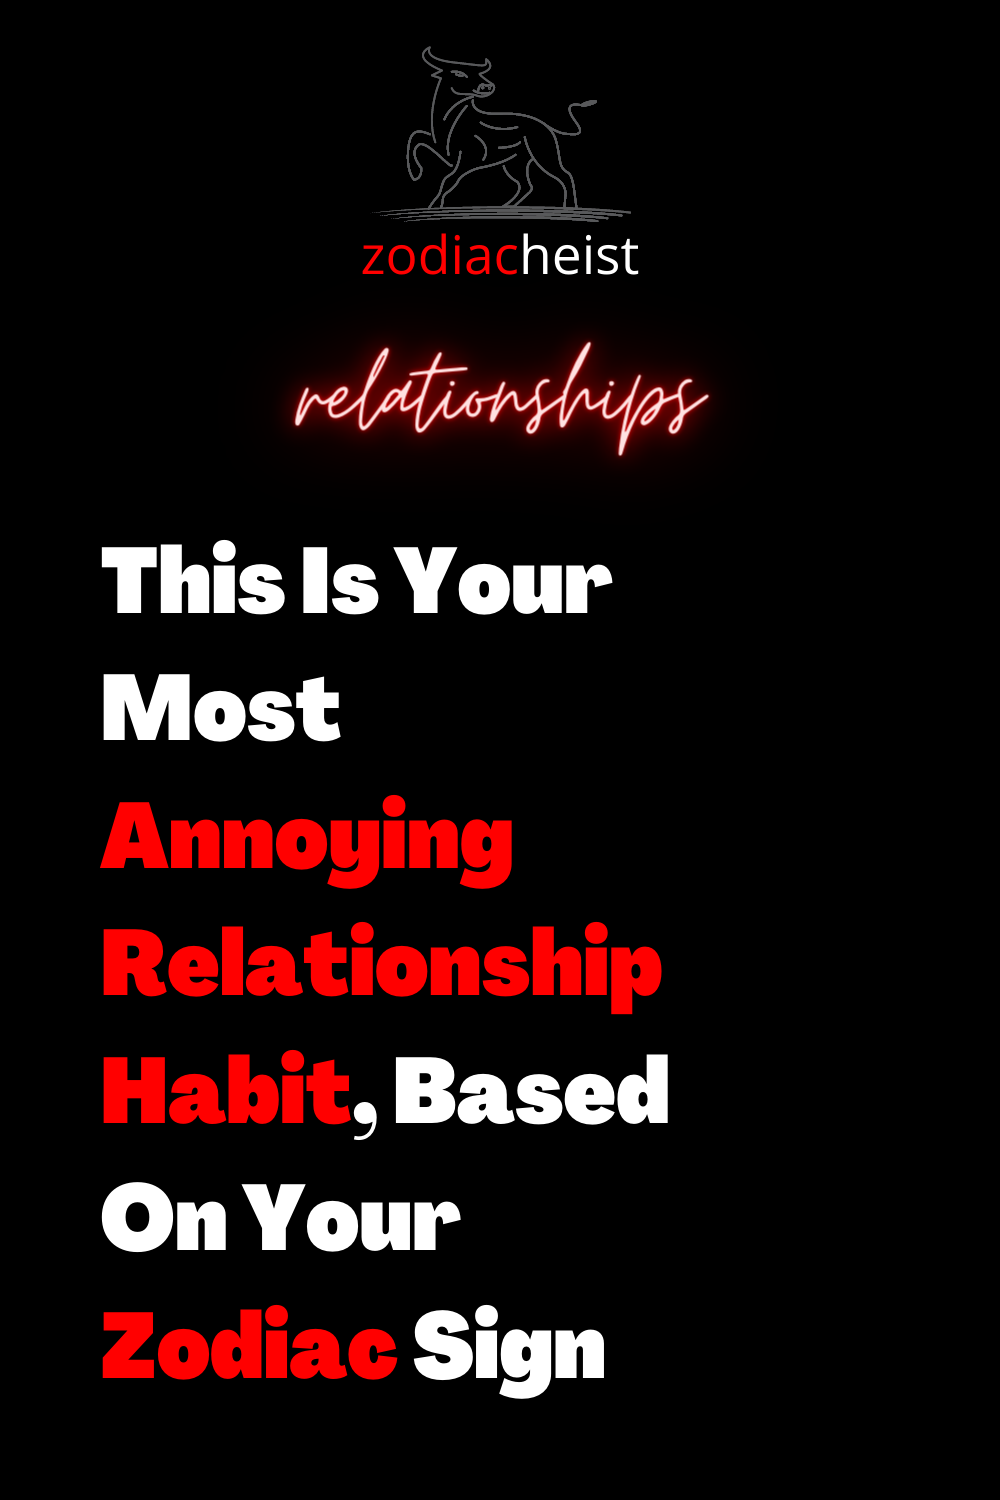 This Is Your Most Annoying Relationship Habit, Based On Your Zodiac Sign